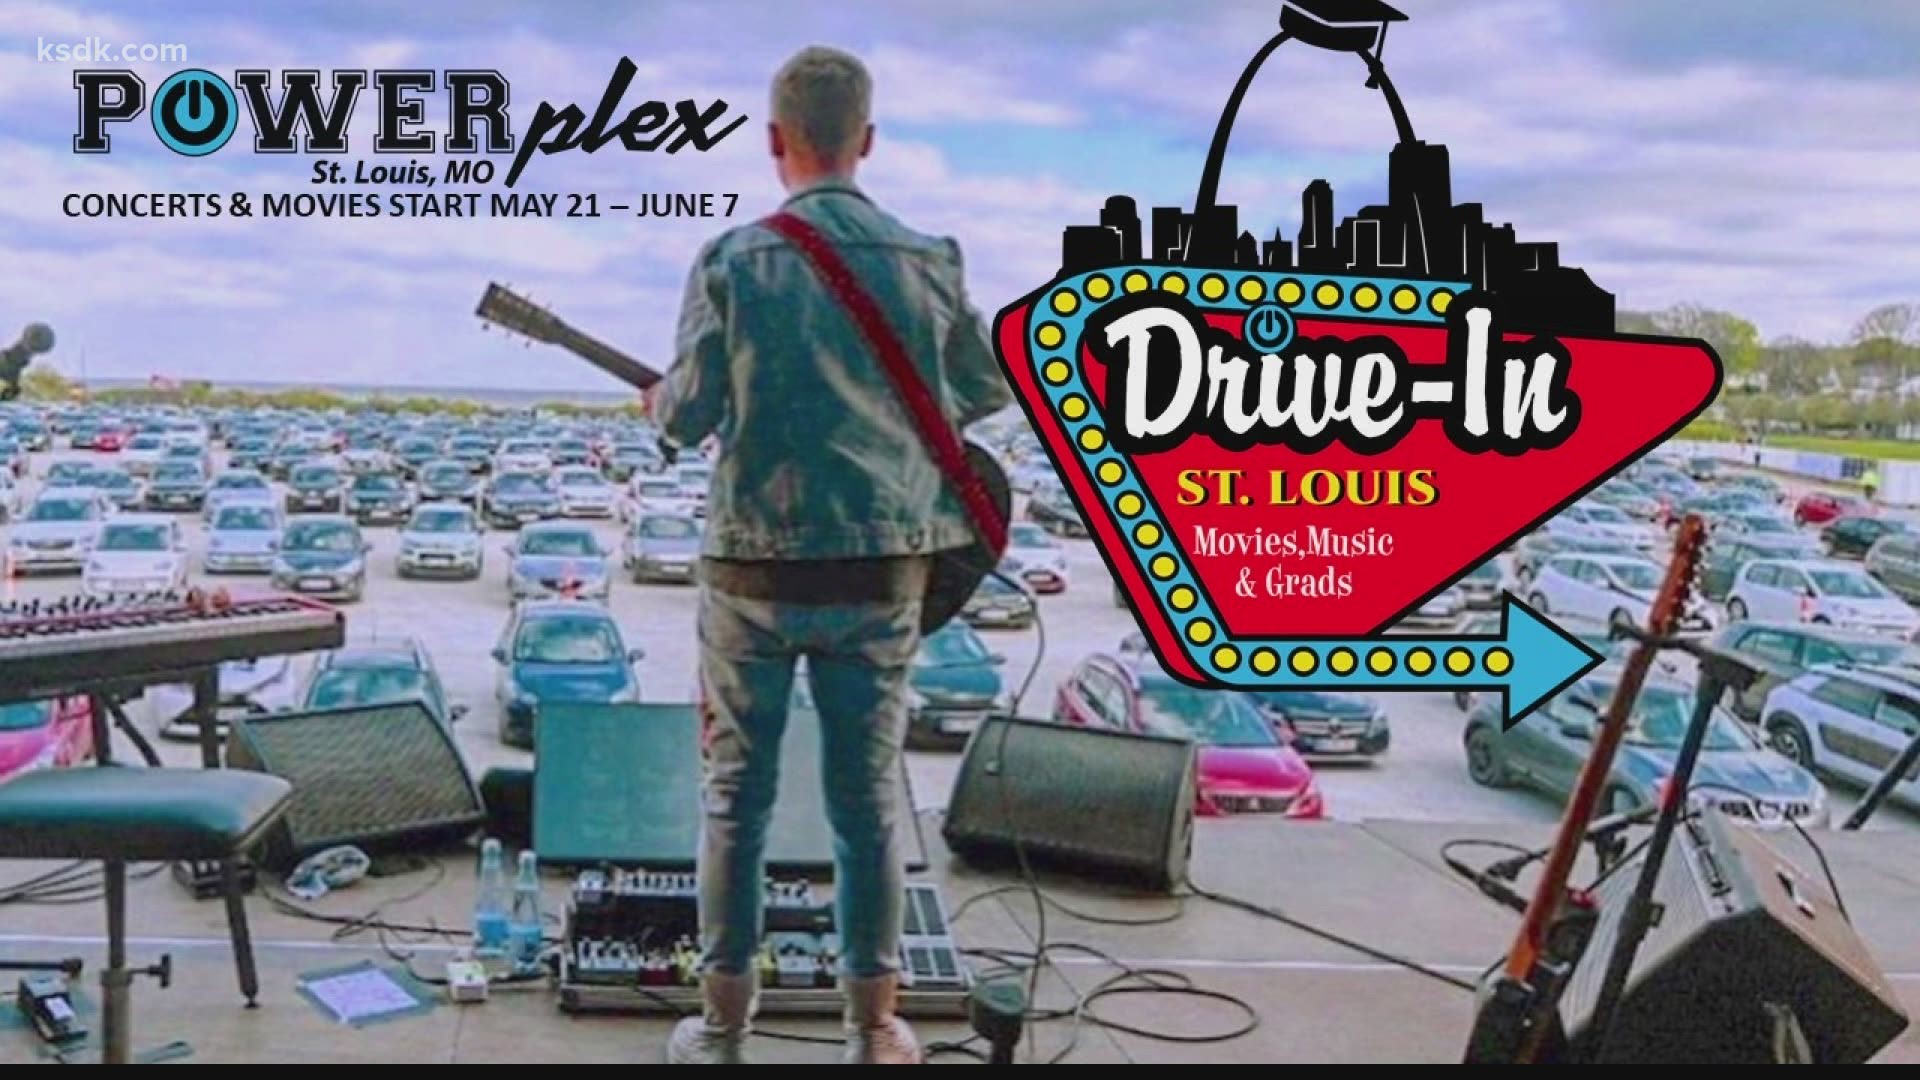 Drive-in movies, concerts in St. Louis | www.bagssaleusa.com